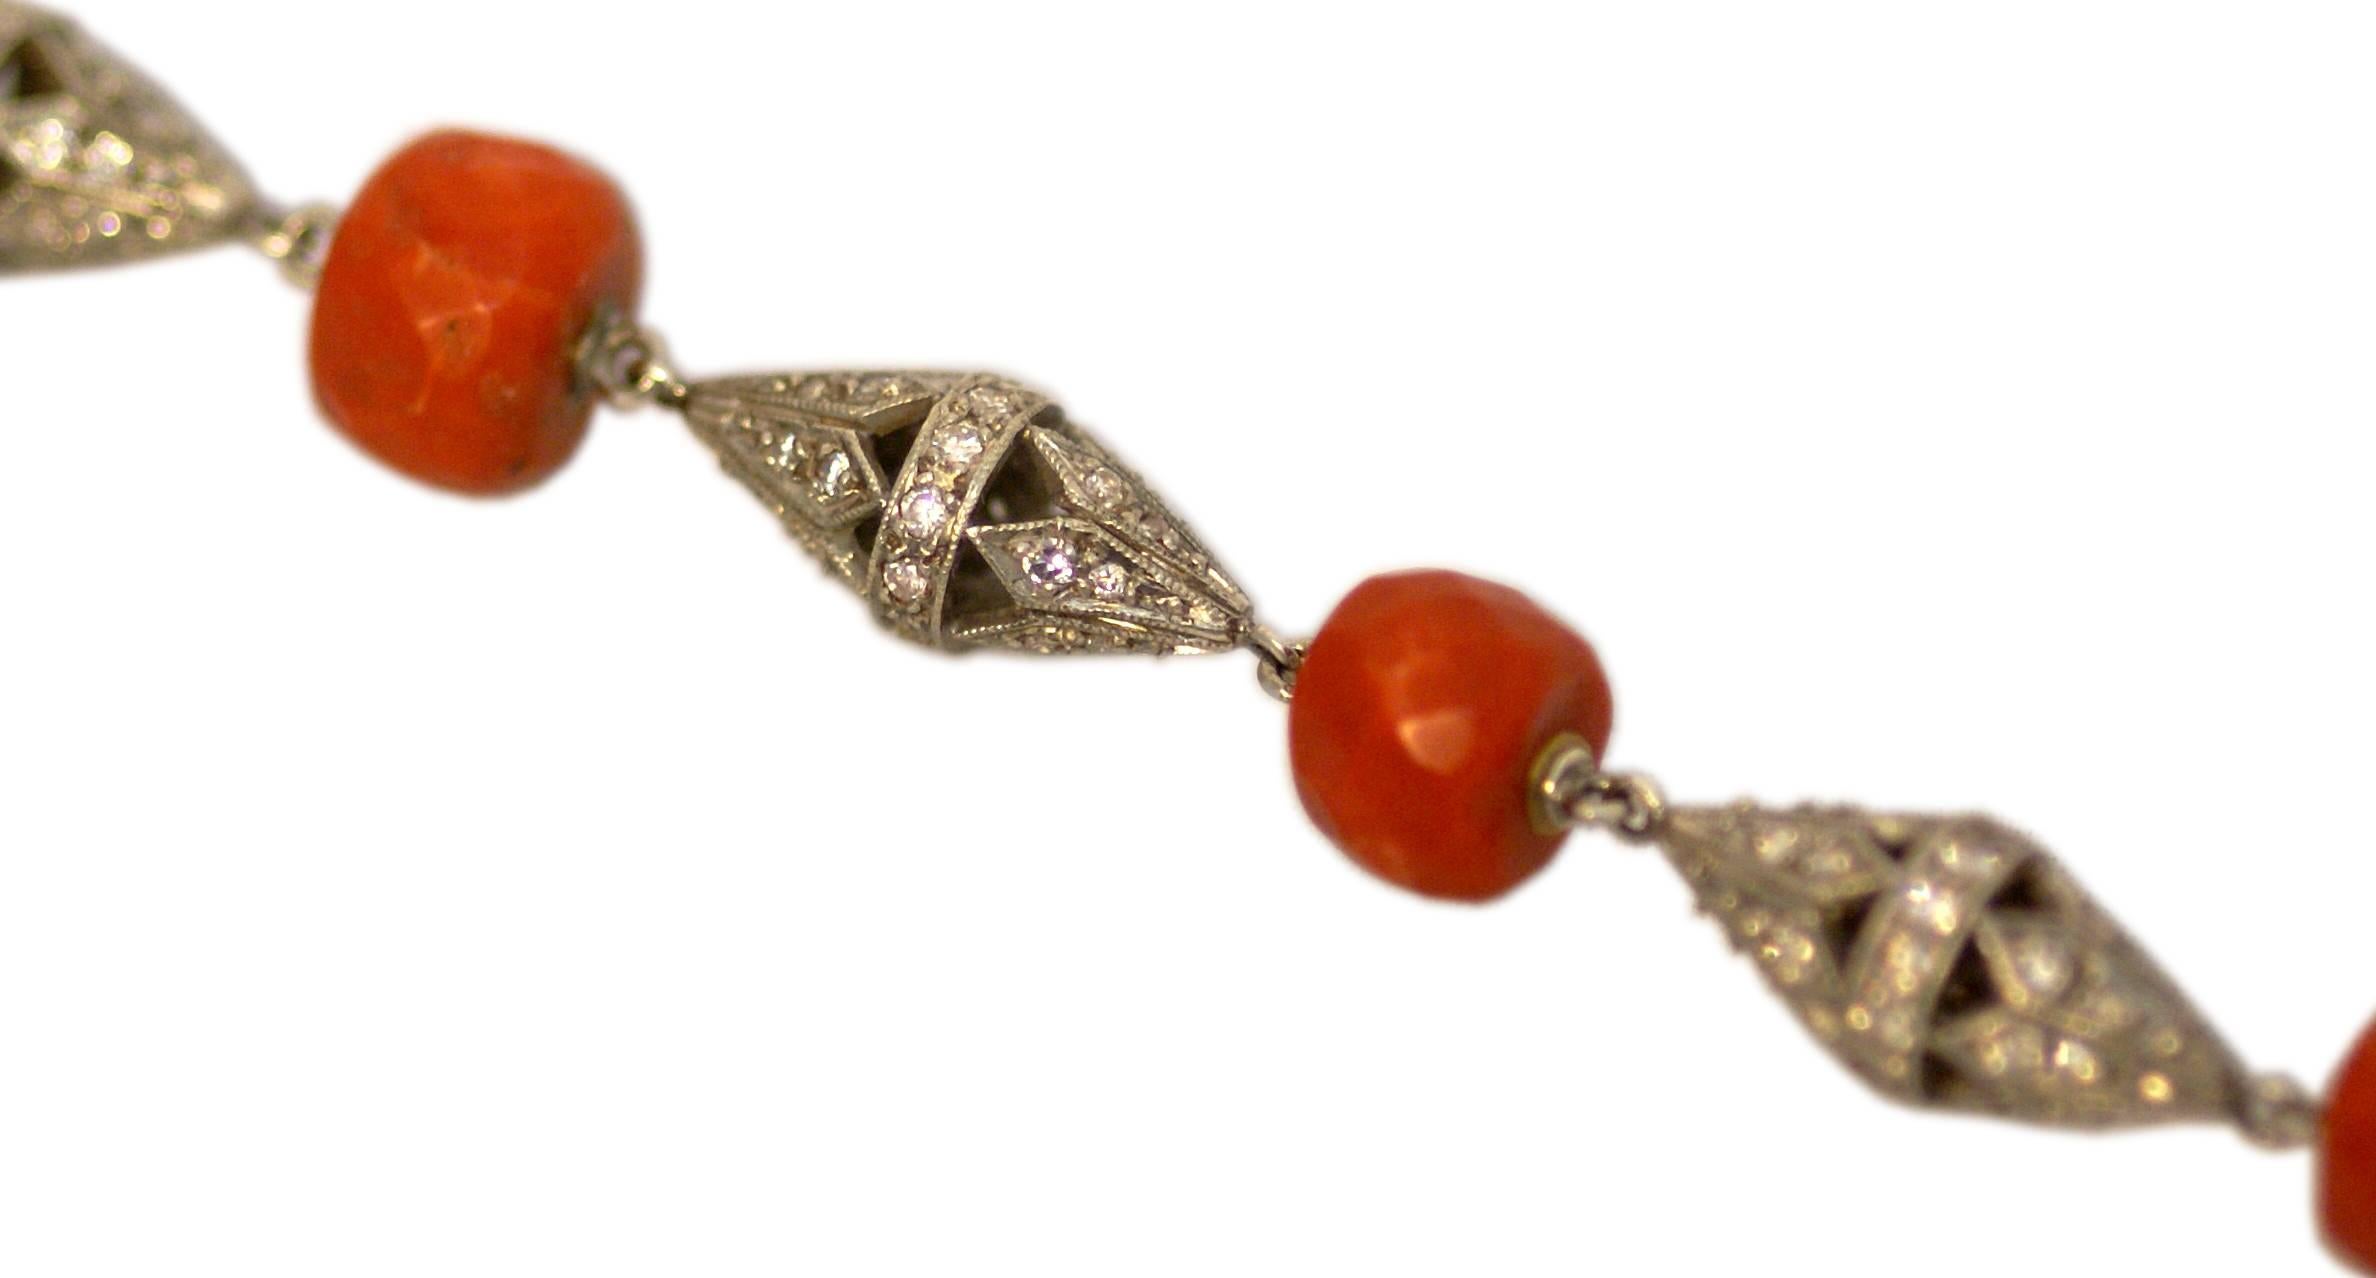 A sophisticated Art Deco link bracelet, interconnecting platinum and diamond cone shaped elements with faceted coral beads. Circa 1920